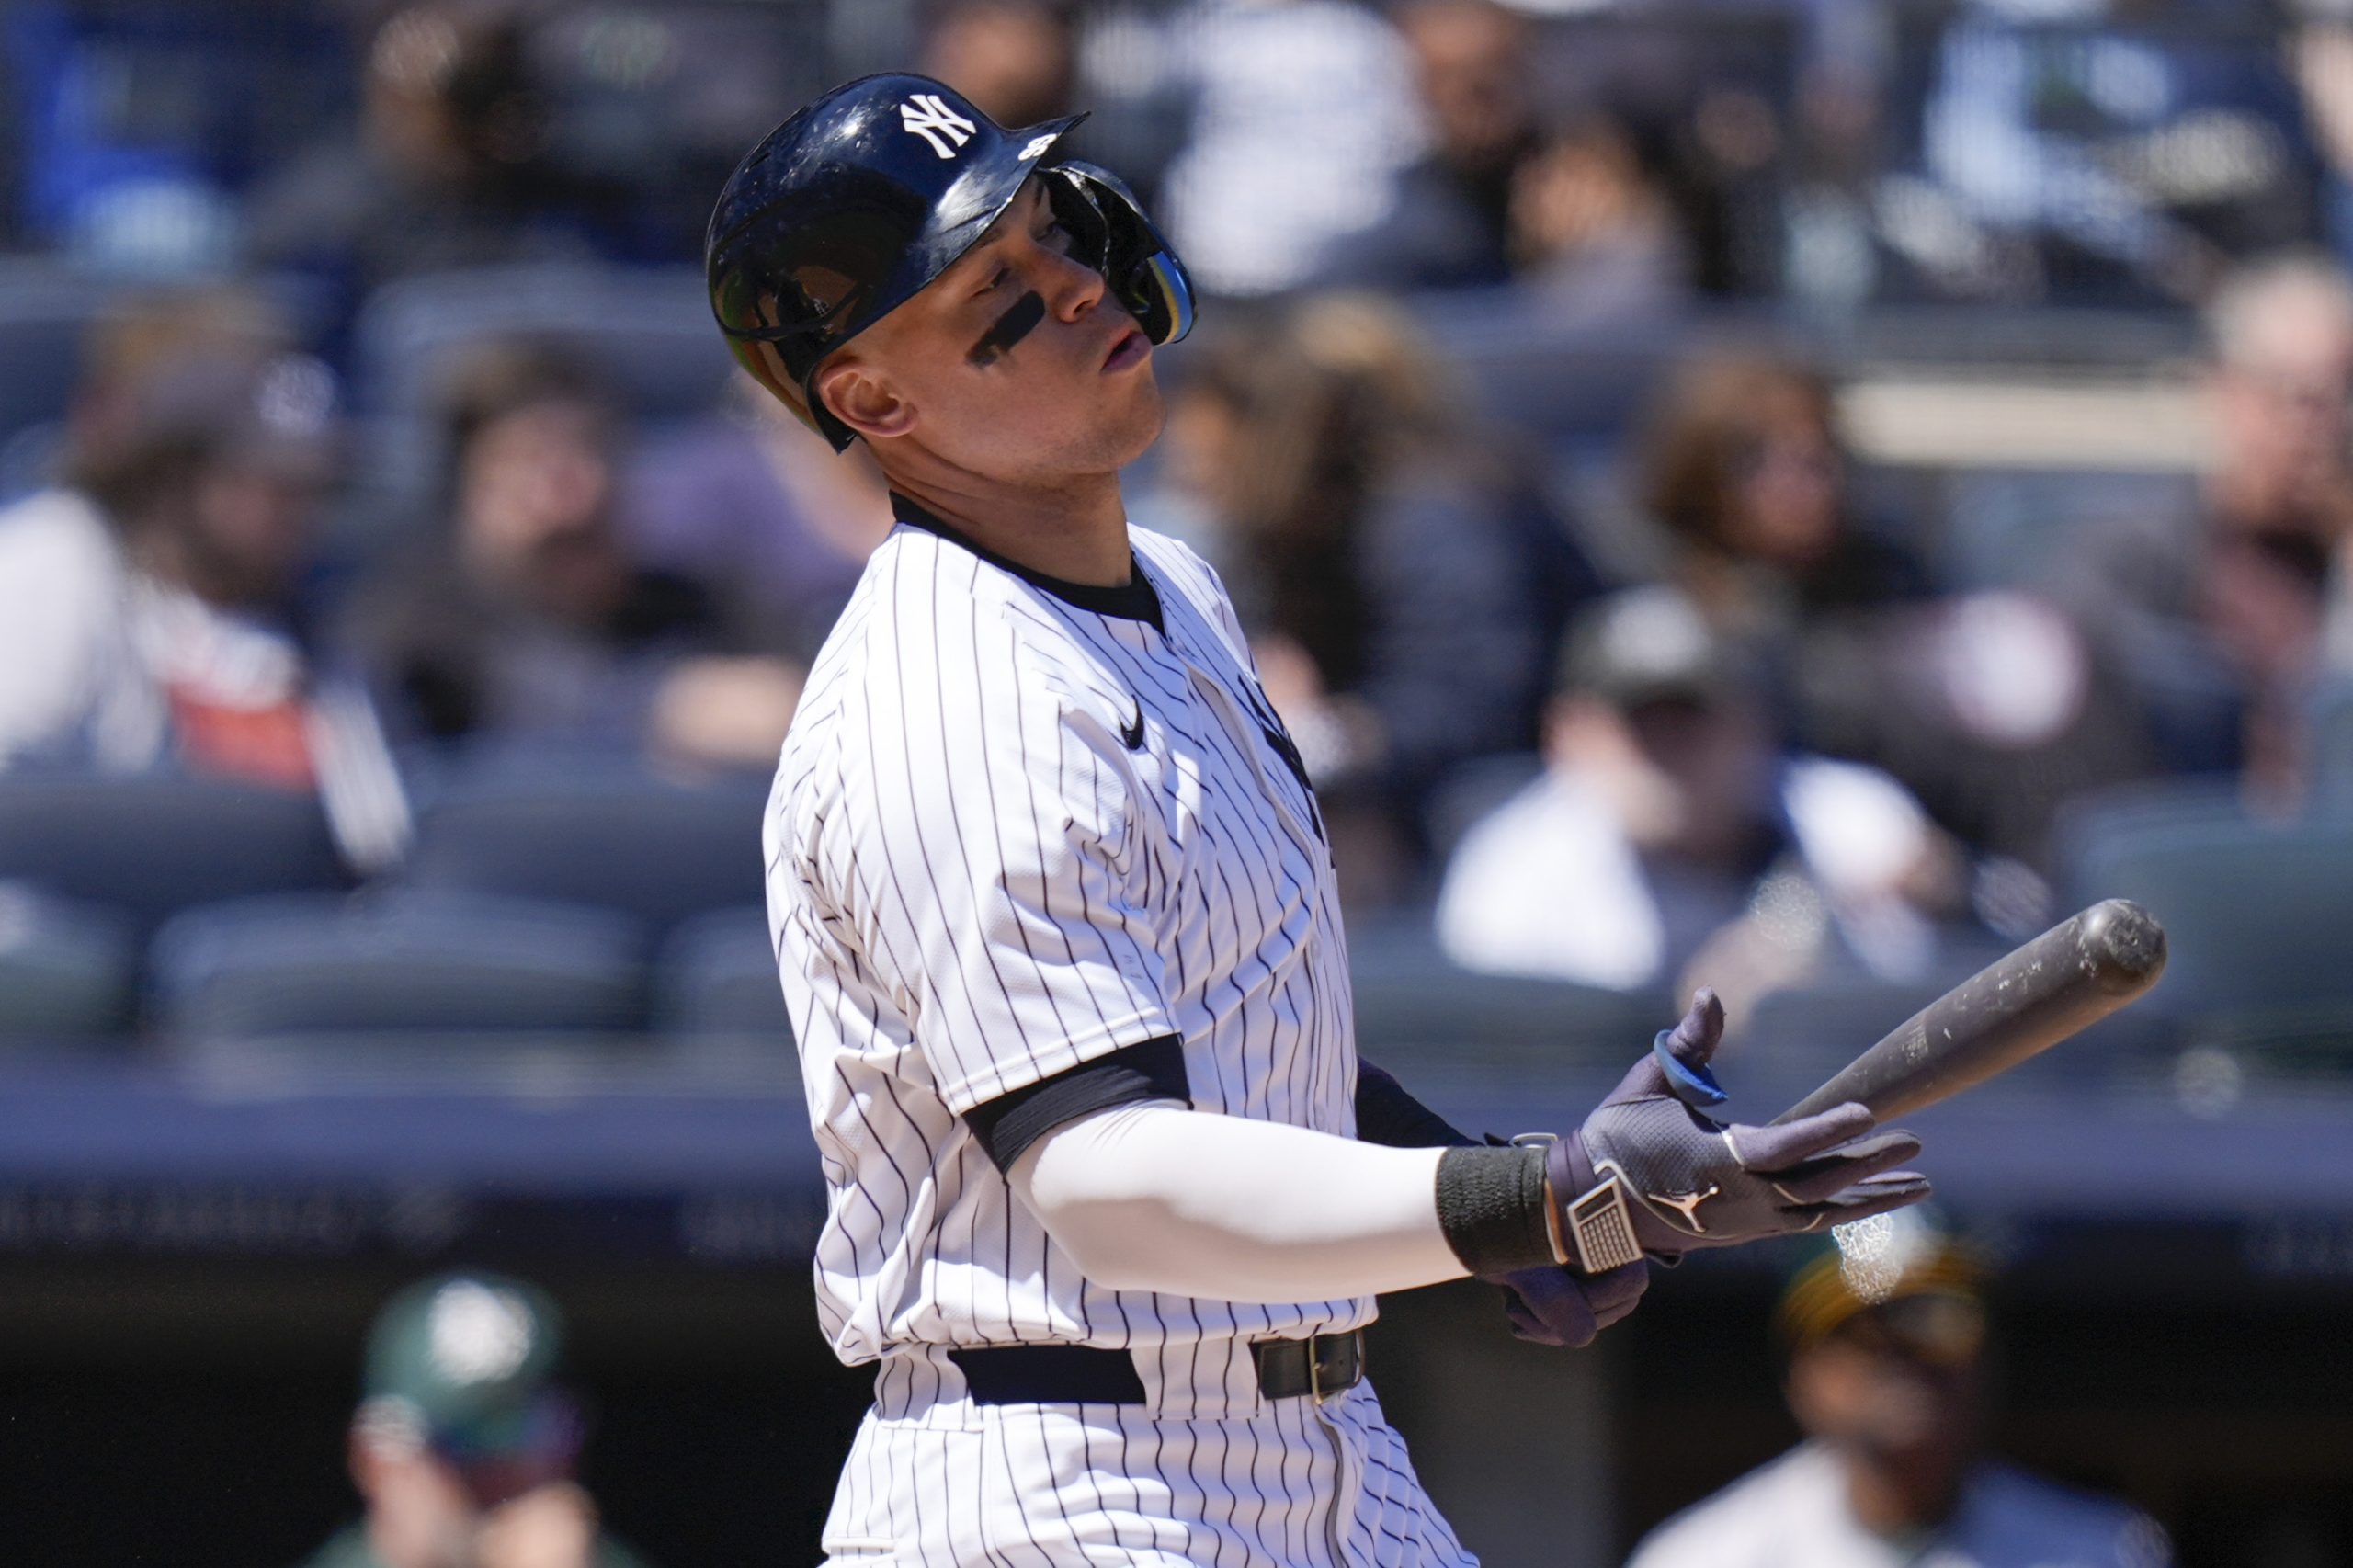 Aaron Judge shrugs off the boos and eyes the bigger picture